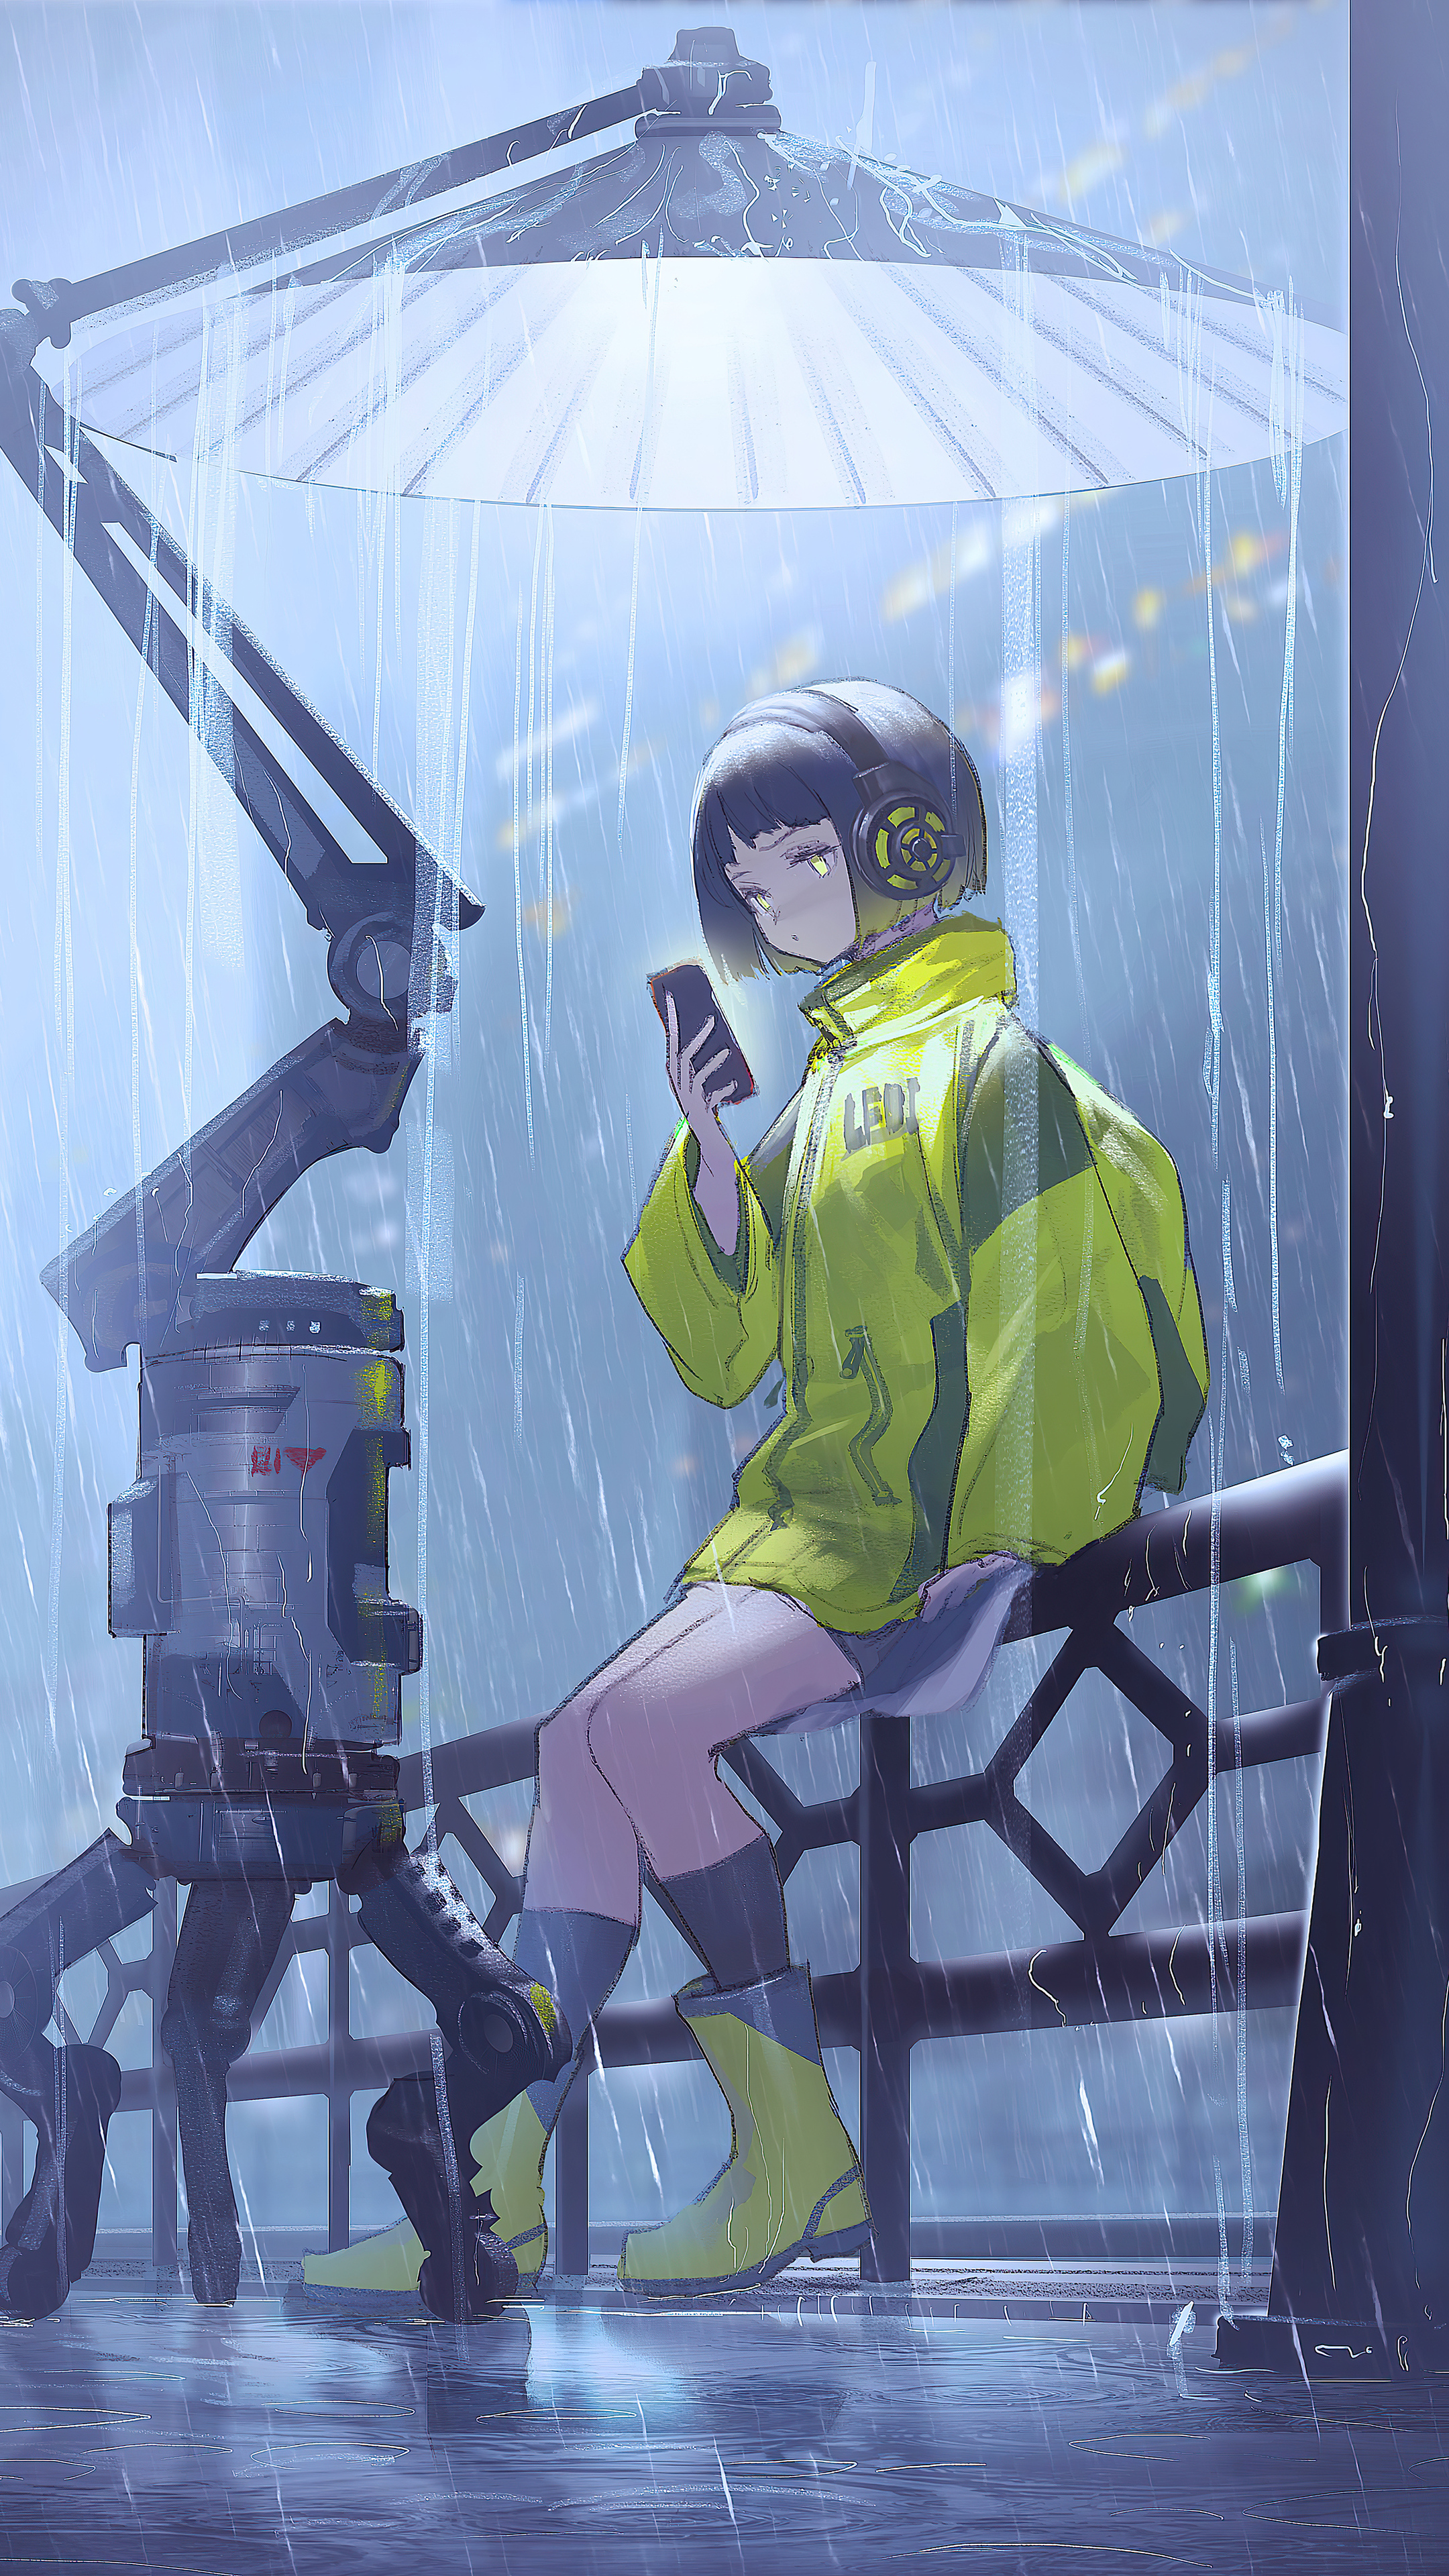 2160x3840 Anime Girl Scifi Umbrella Rain 4k Sony Xperia X,XZ,Z5 Premium HD  4k Wallpapers, Images, Backgrounds, Photos and Pictures